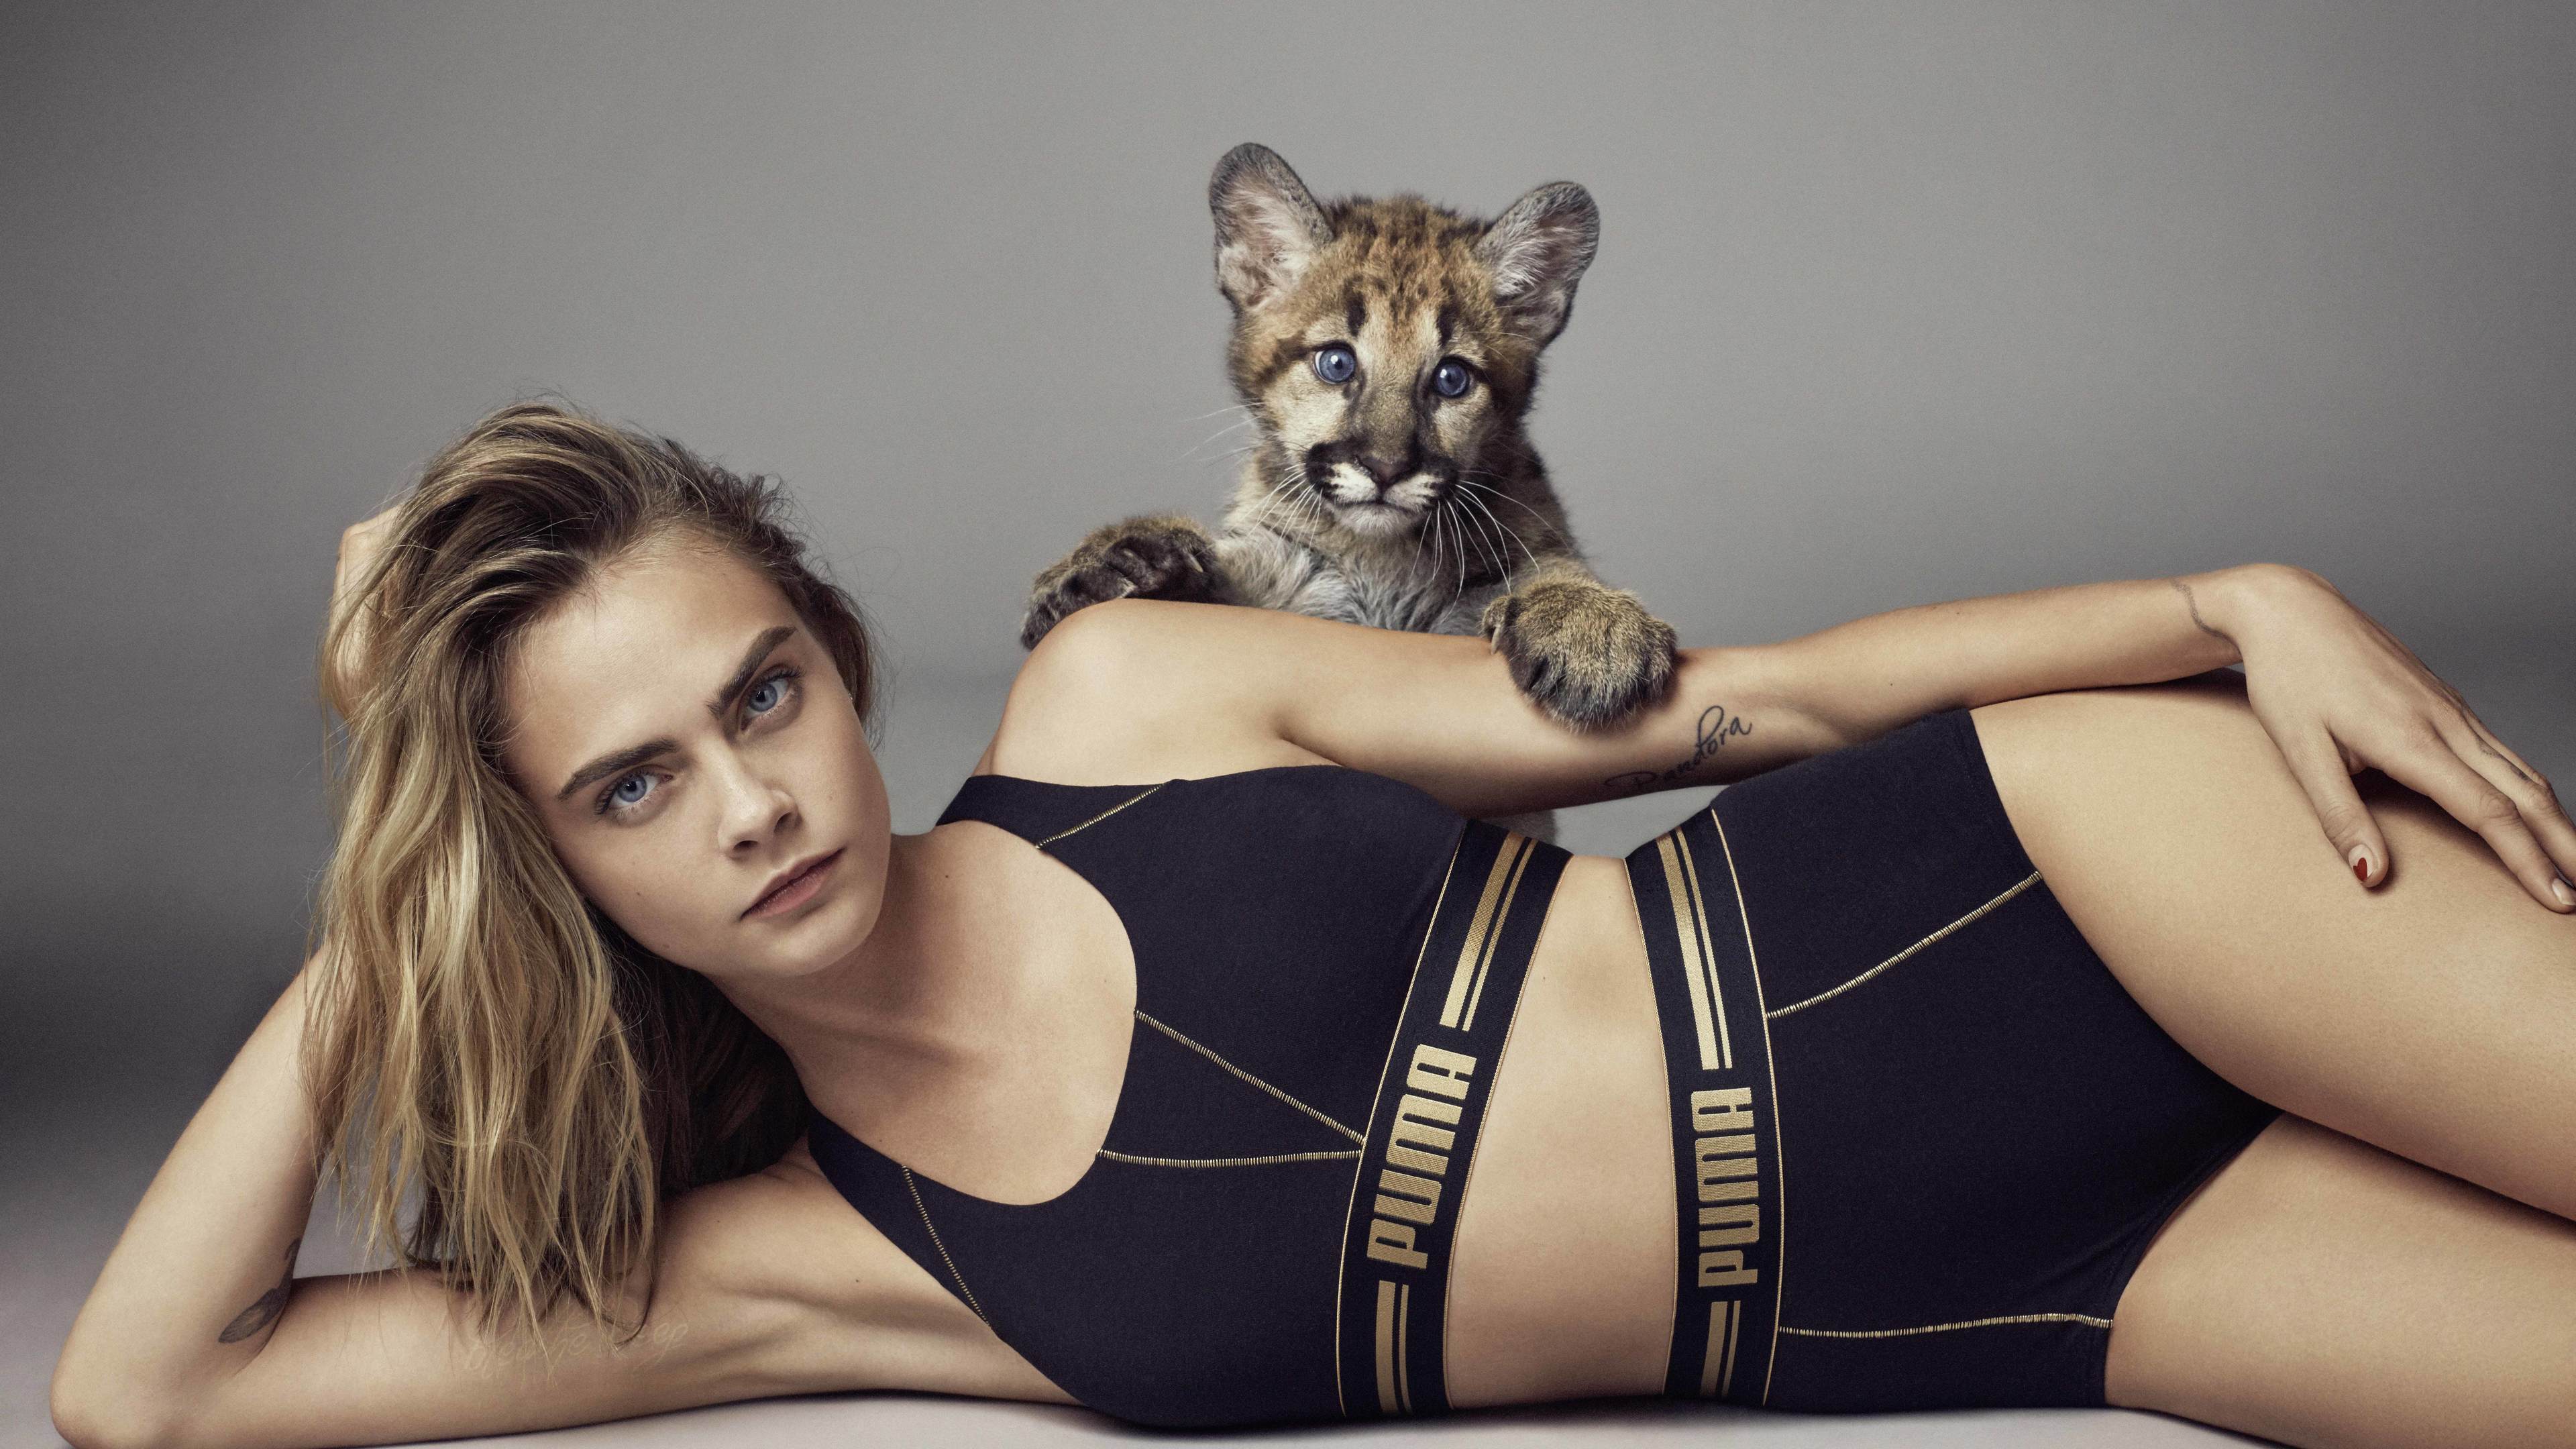 Cara Delevingne Photoshoot 2017 Wallpapers